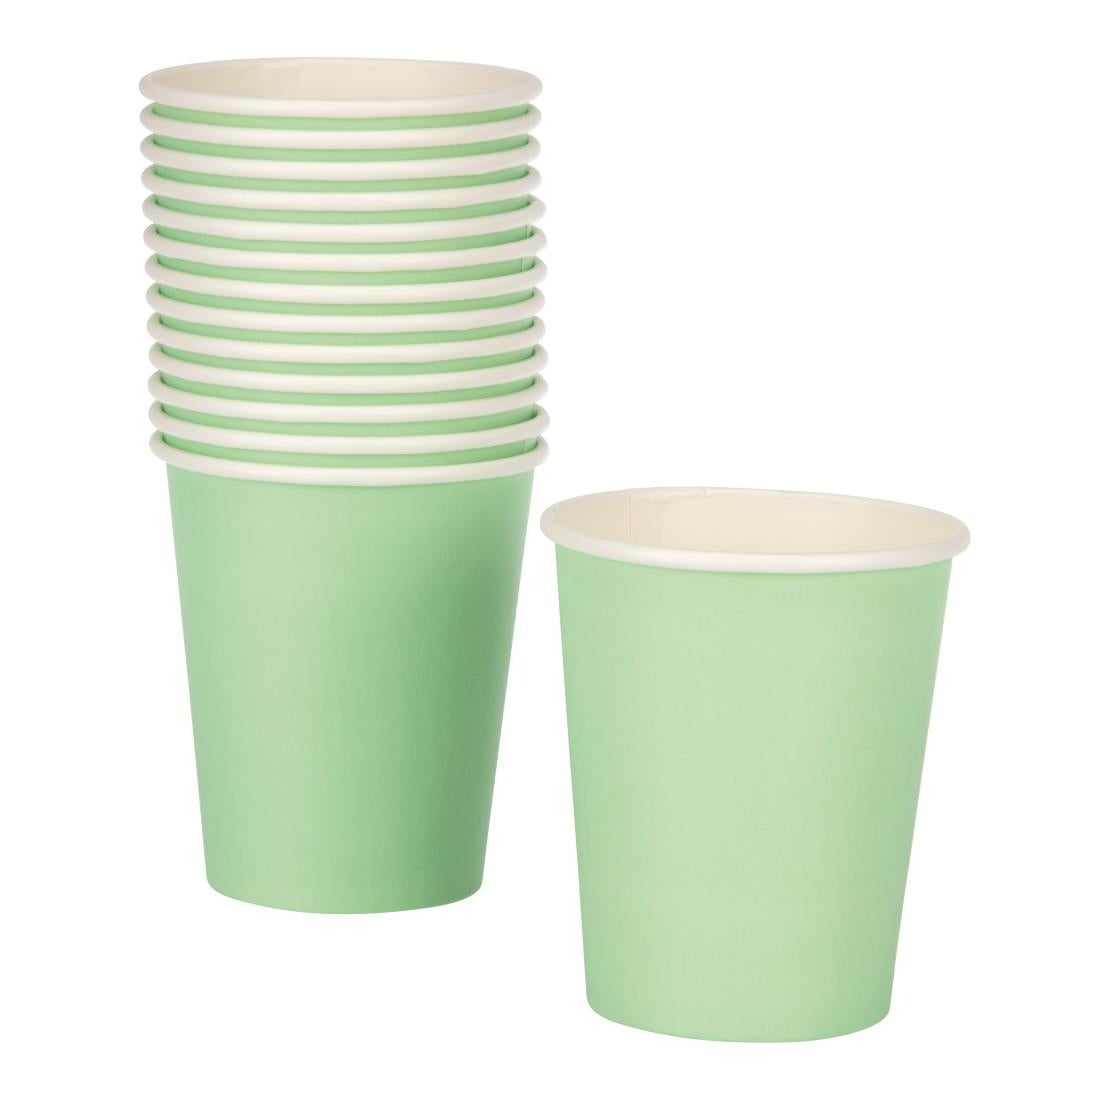 GP400 Fiesta Recyclable Coffee Cups Single Wall Turquoise 225ml / 8oz (Pack of 50) JD Catering Equipment Solutions Ltd